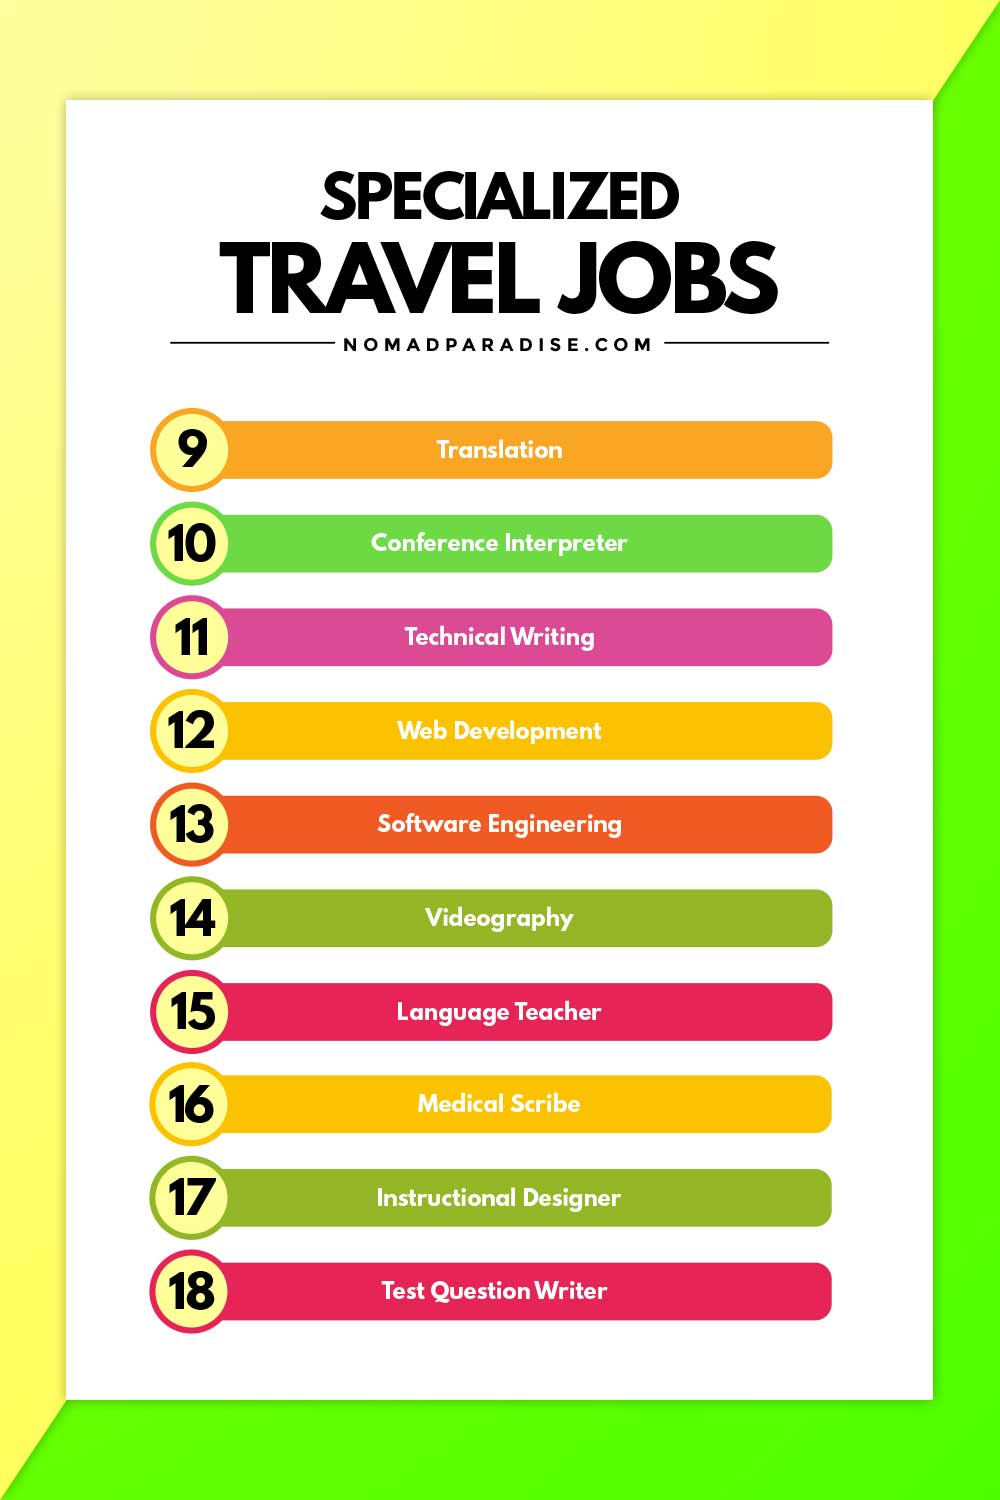 travel and tourism jobs europe